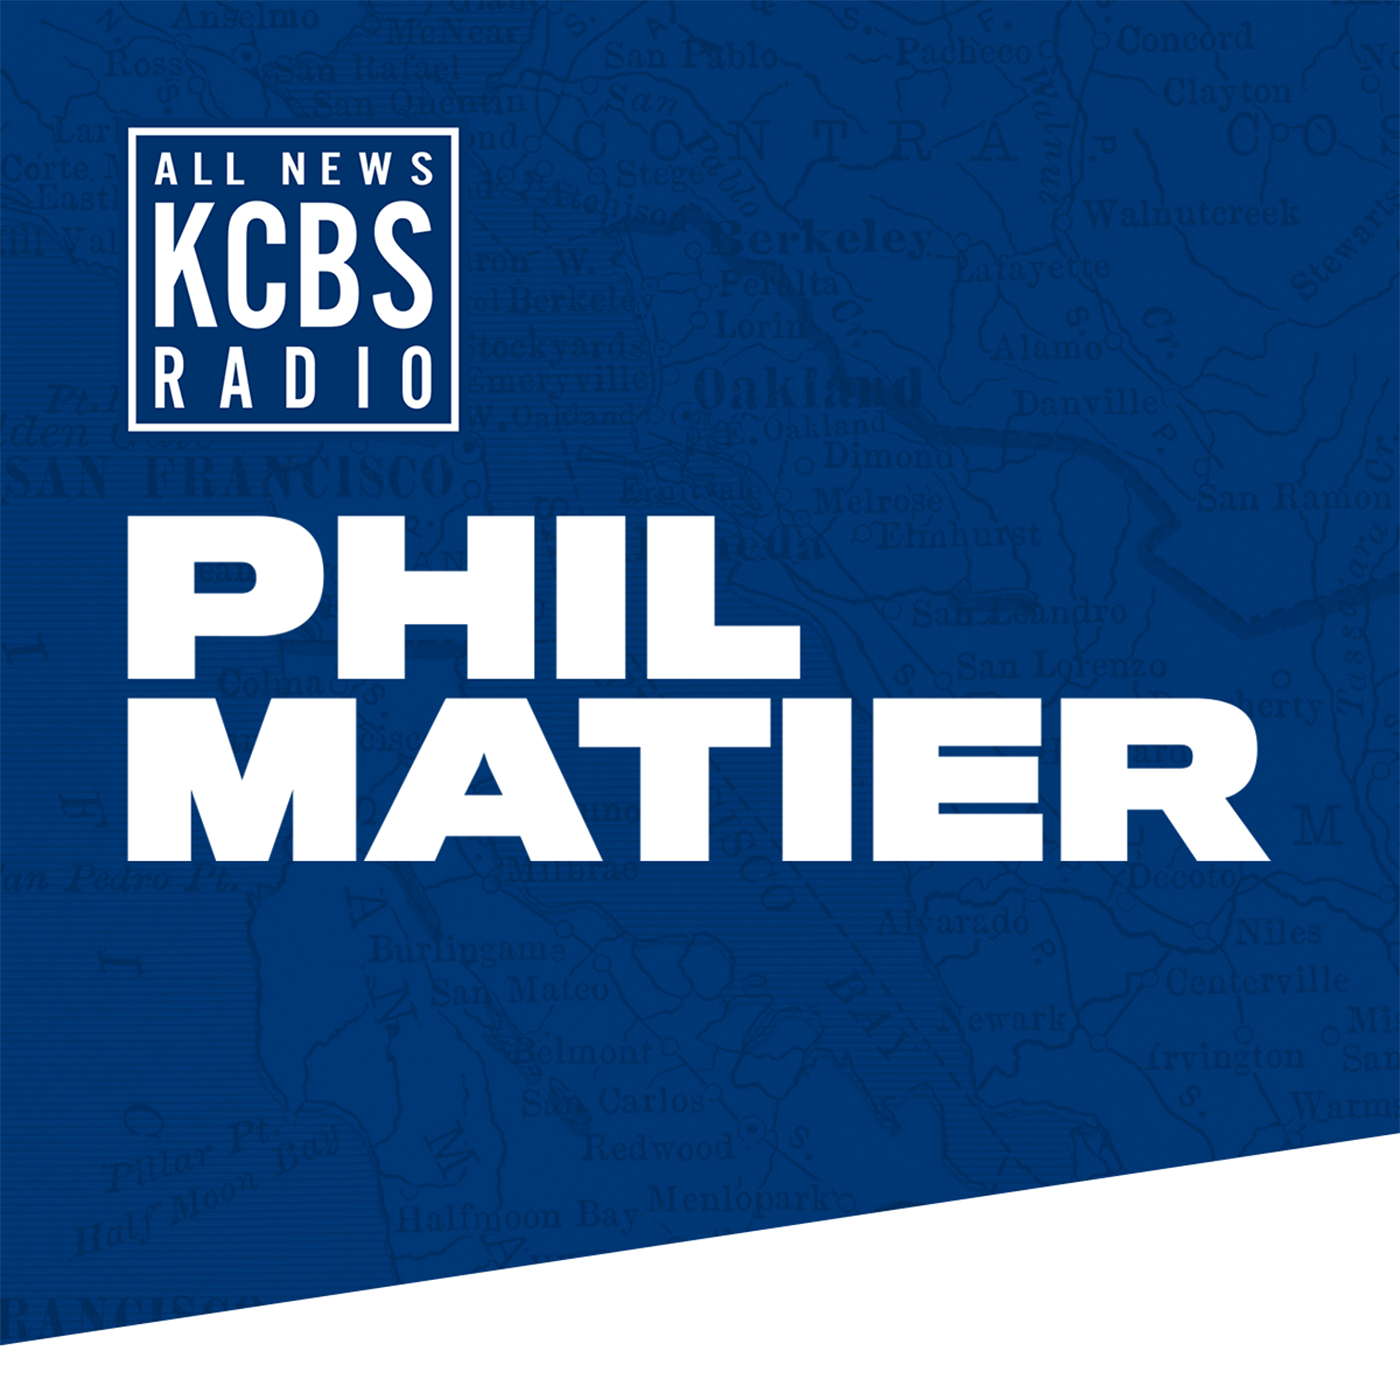 Phil Matier: A Question of Ethics After the Arrest of Mohammed Nuru